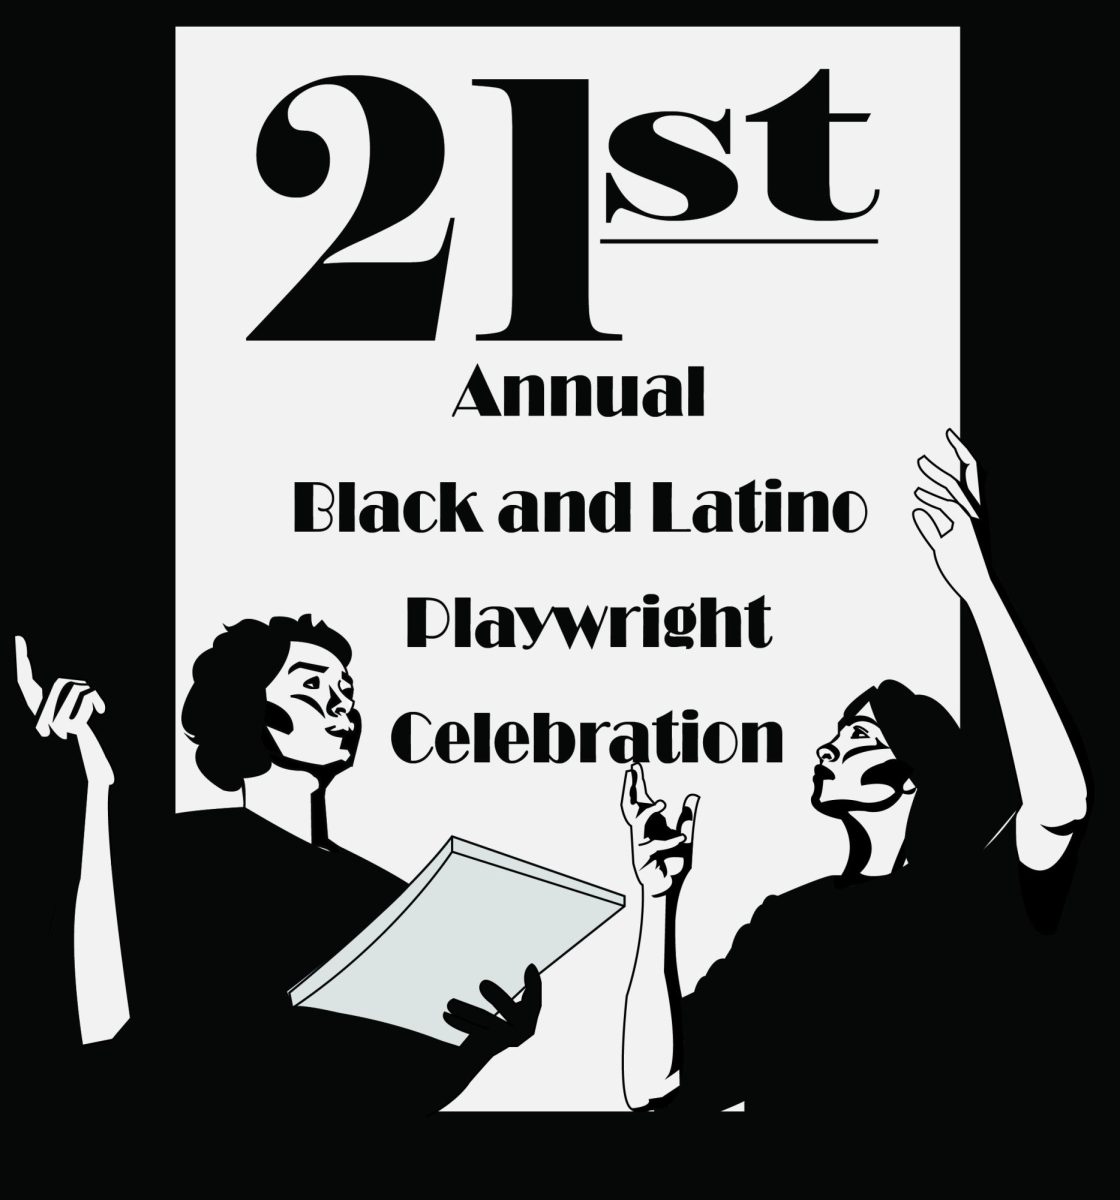 TXST+Theatre+to+host+21st+annual+Black+and+Latino+Playwright+Celebration